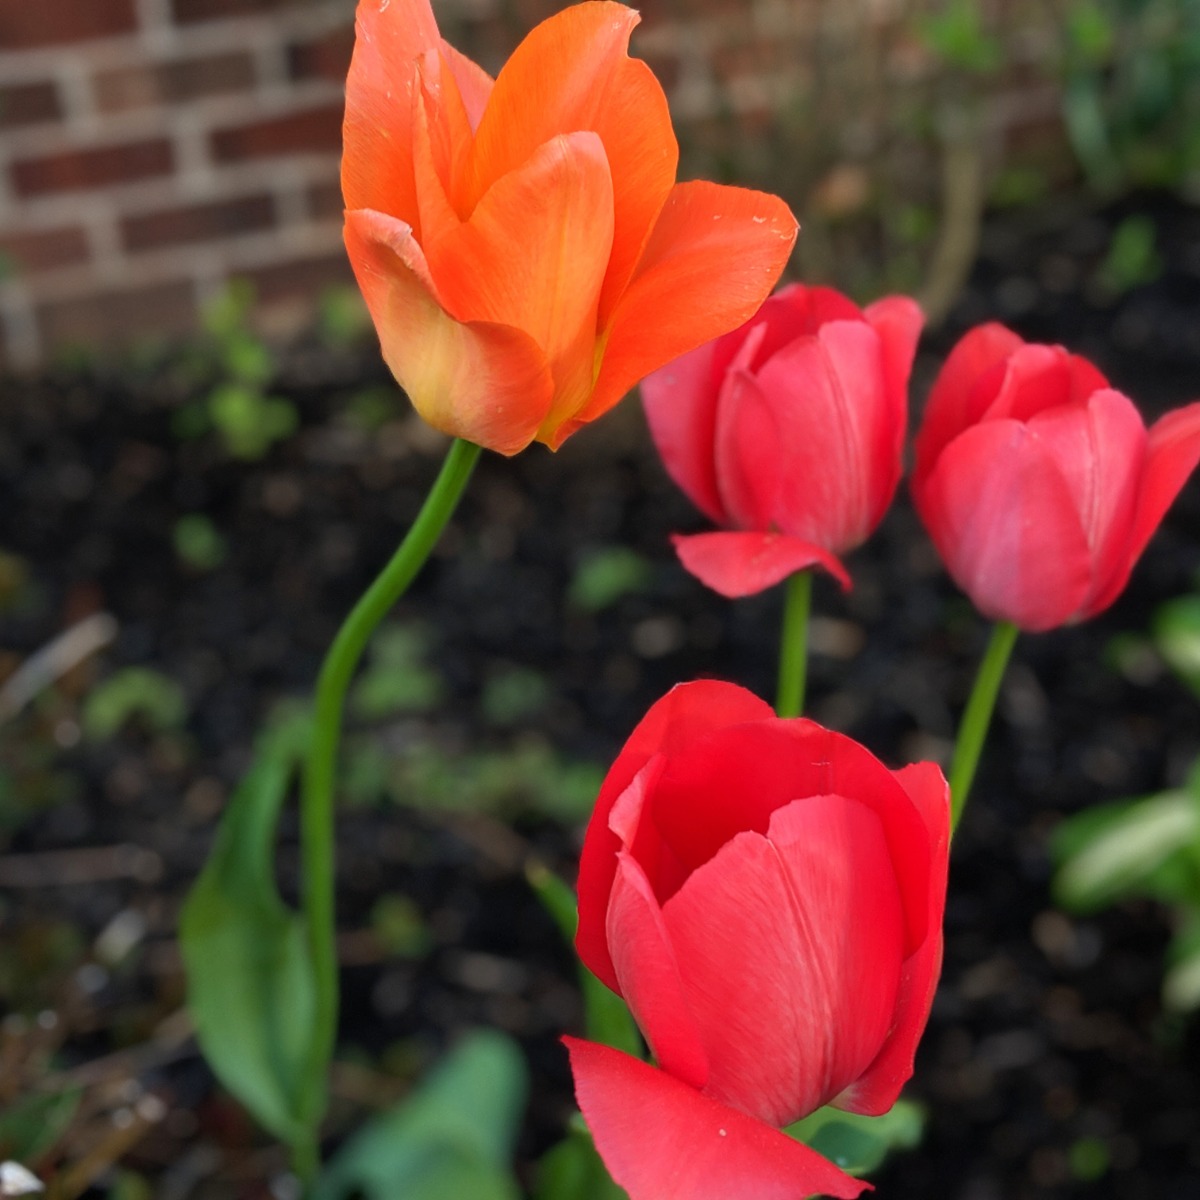 Red and Orange Tulips in our 2019 Flowerbed